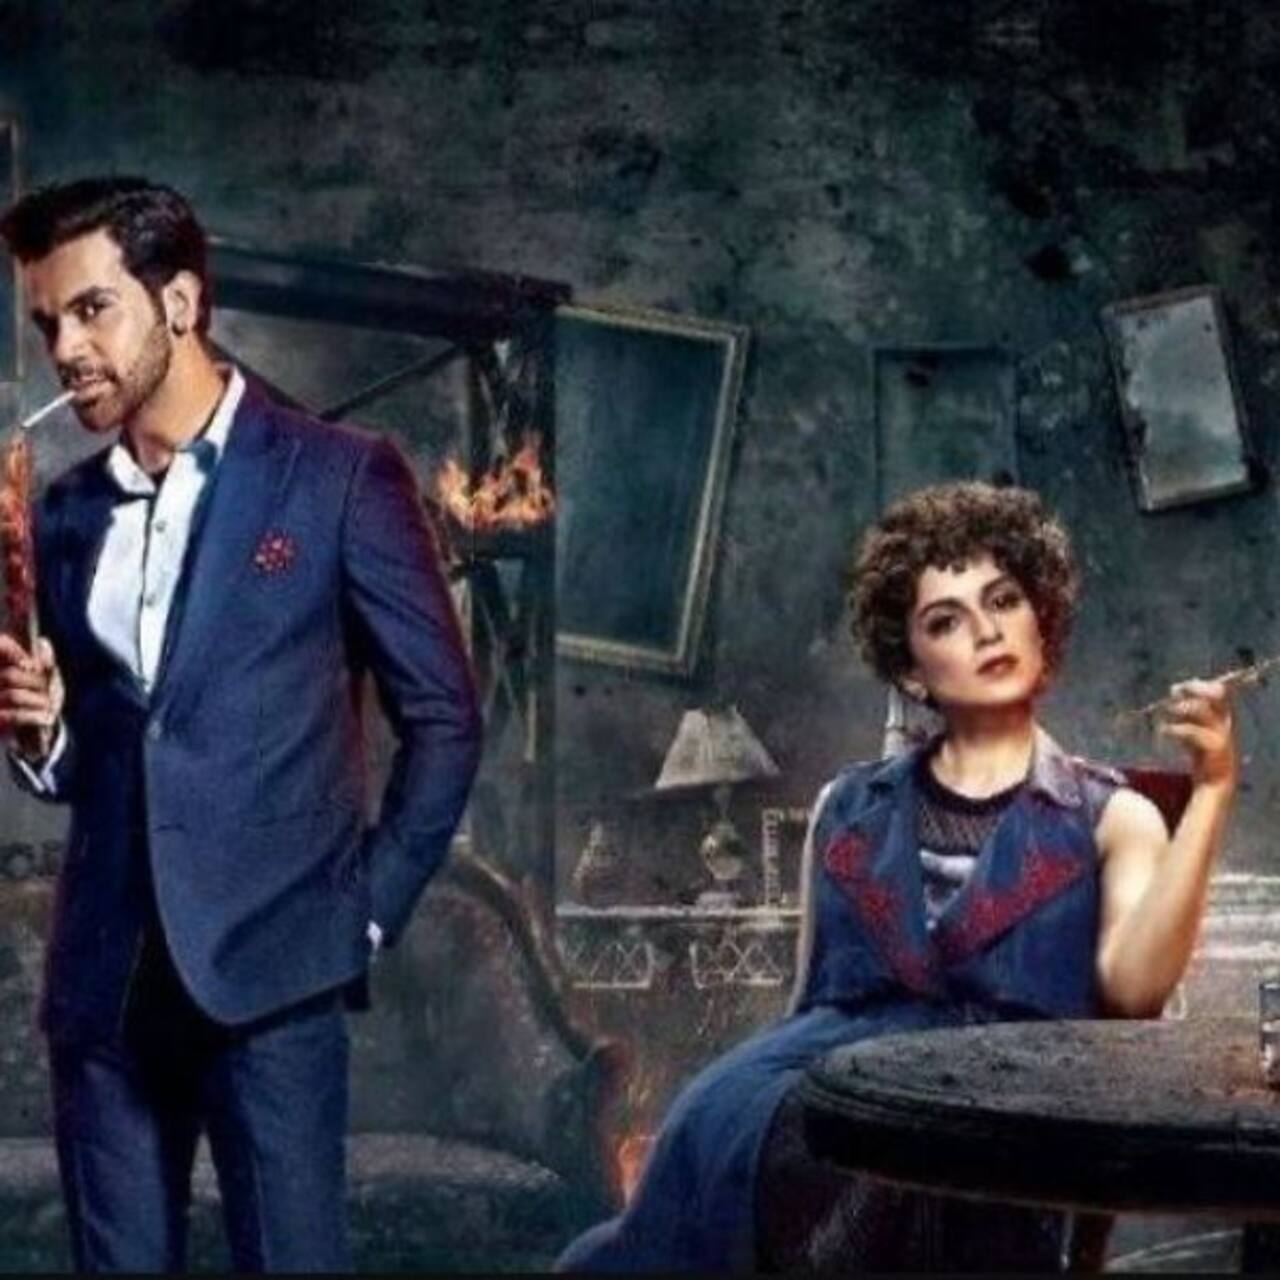 Judgementall Hai Kya first reactions: Maniesh Paul, Radhika Madan and other celebs call it a crazy and must-watch film